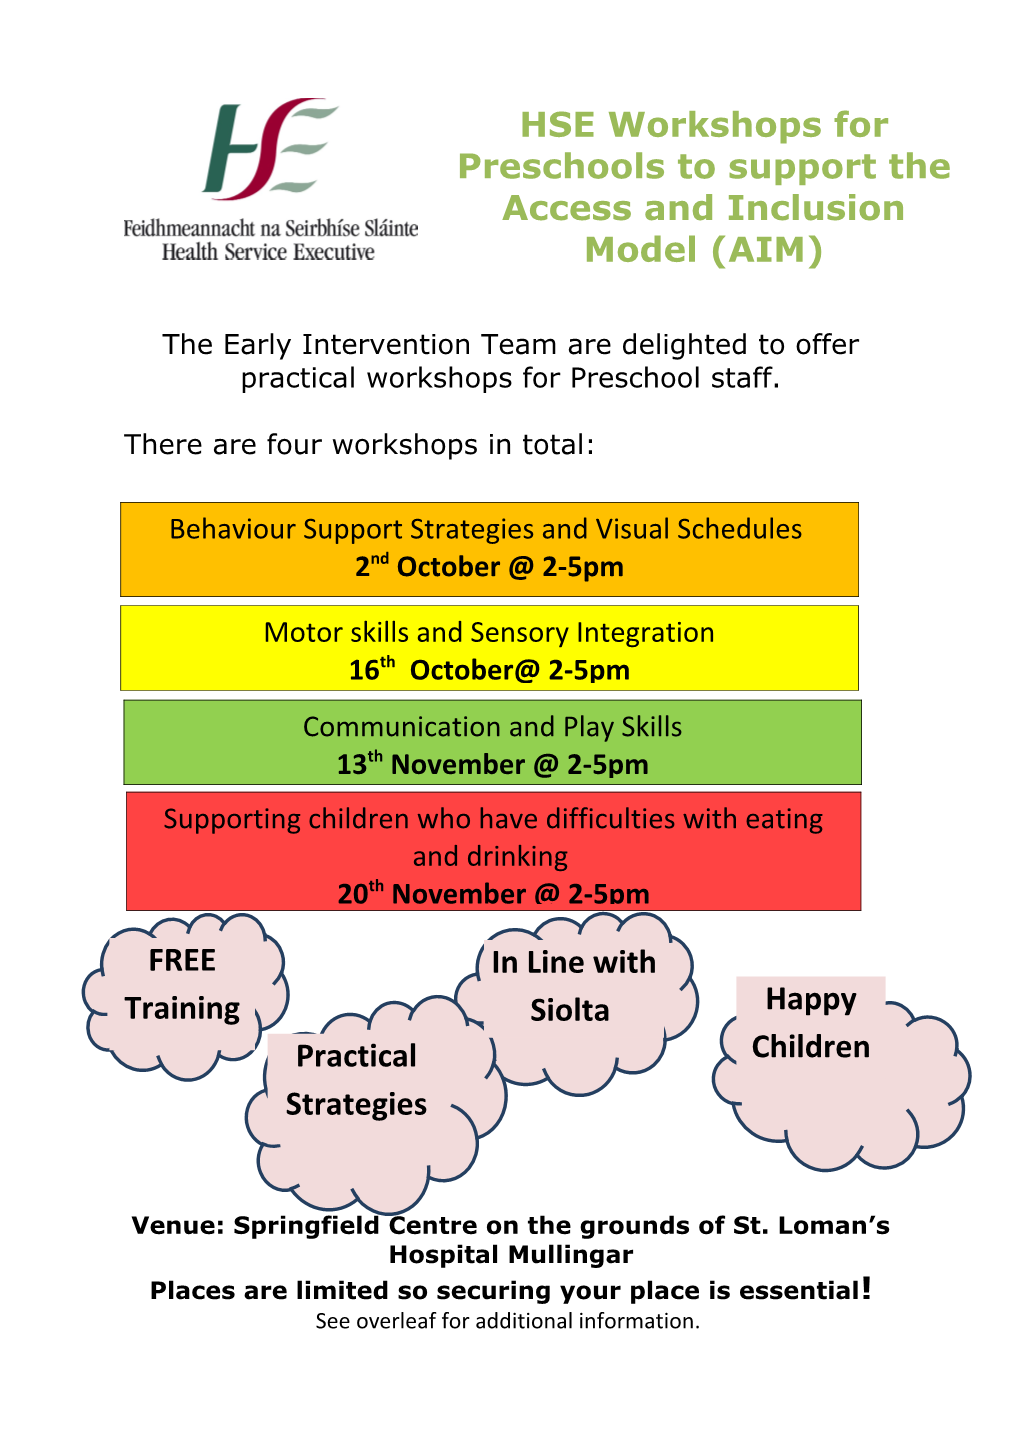 The Early Intervention Team Are Delighted to Offer Practicalworkshops for Preschool Staff